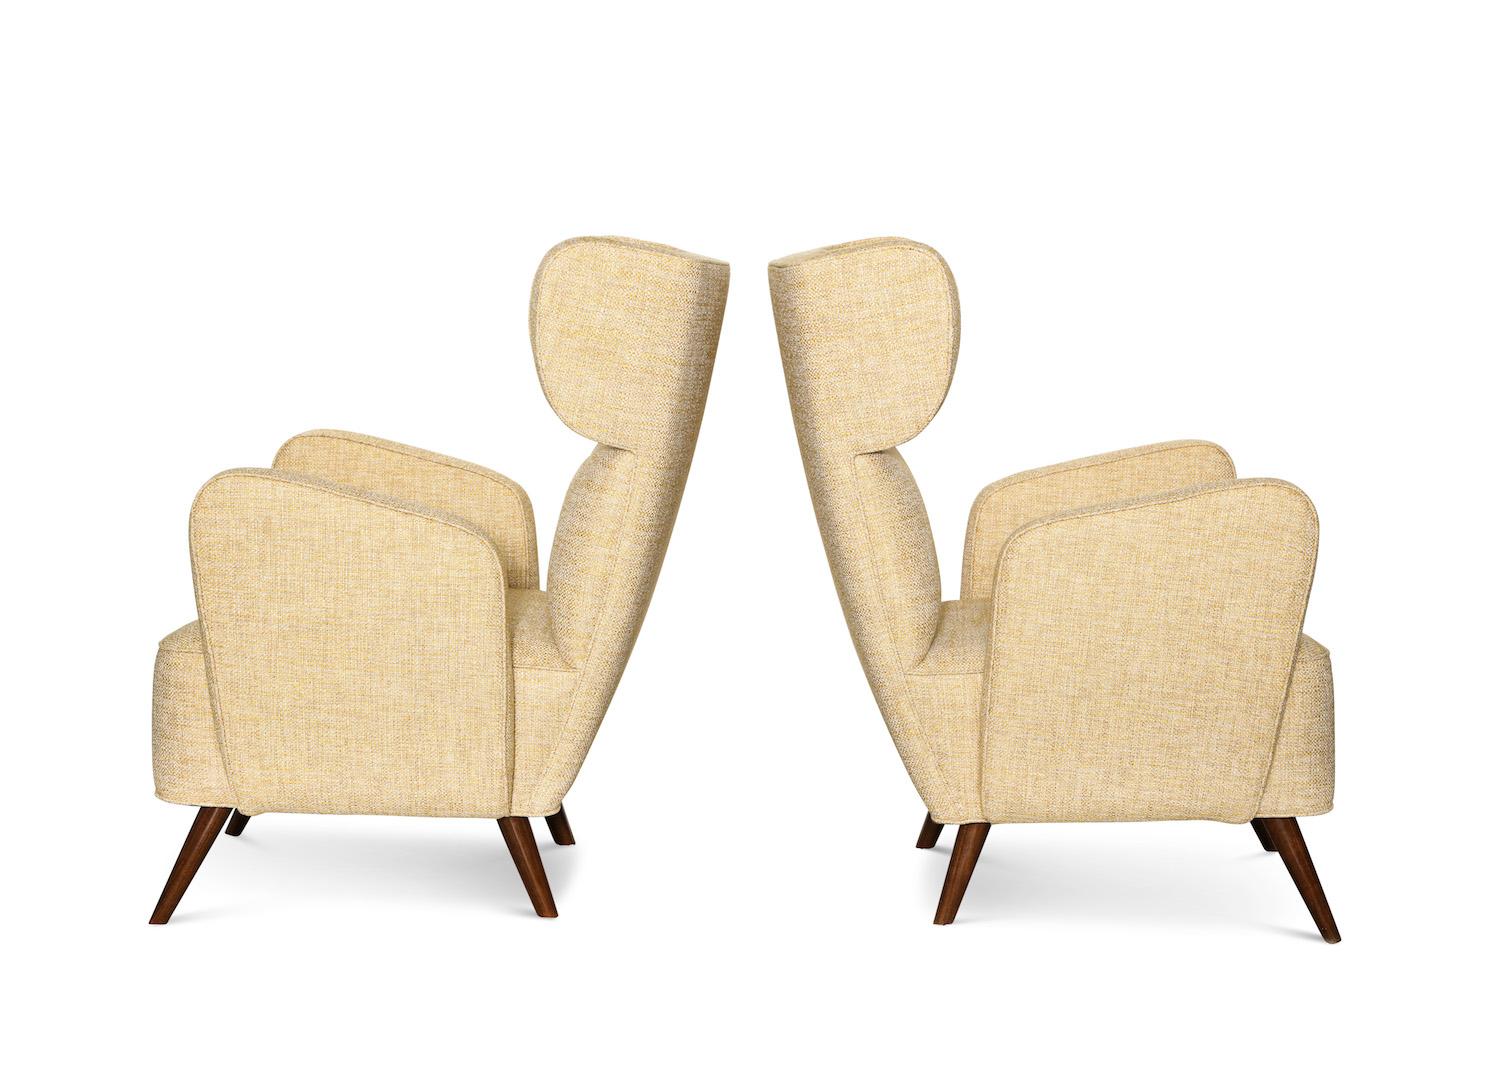 "Treno" Contemporary Lounge Chairs